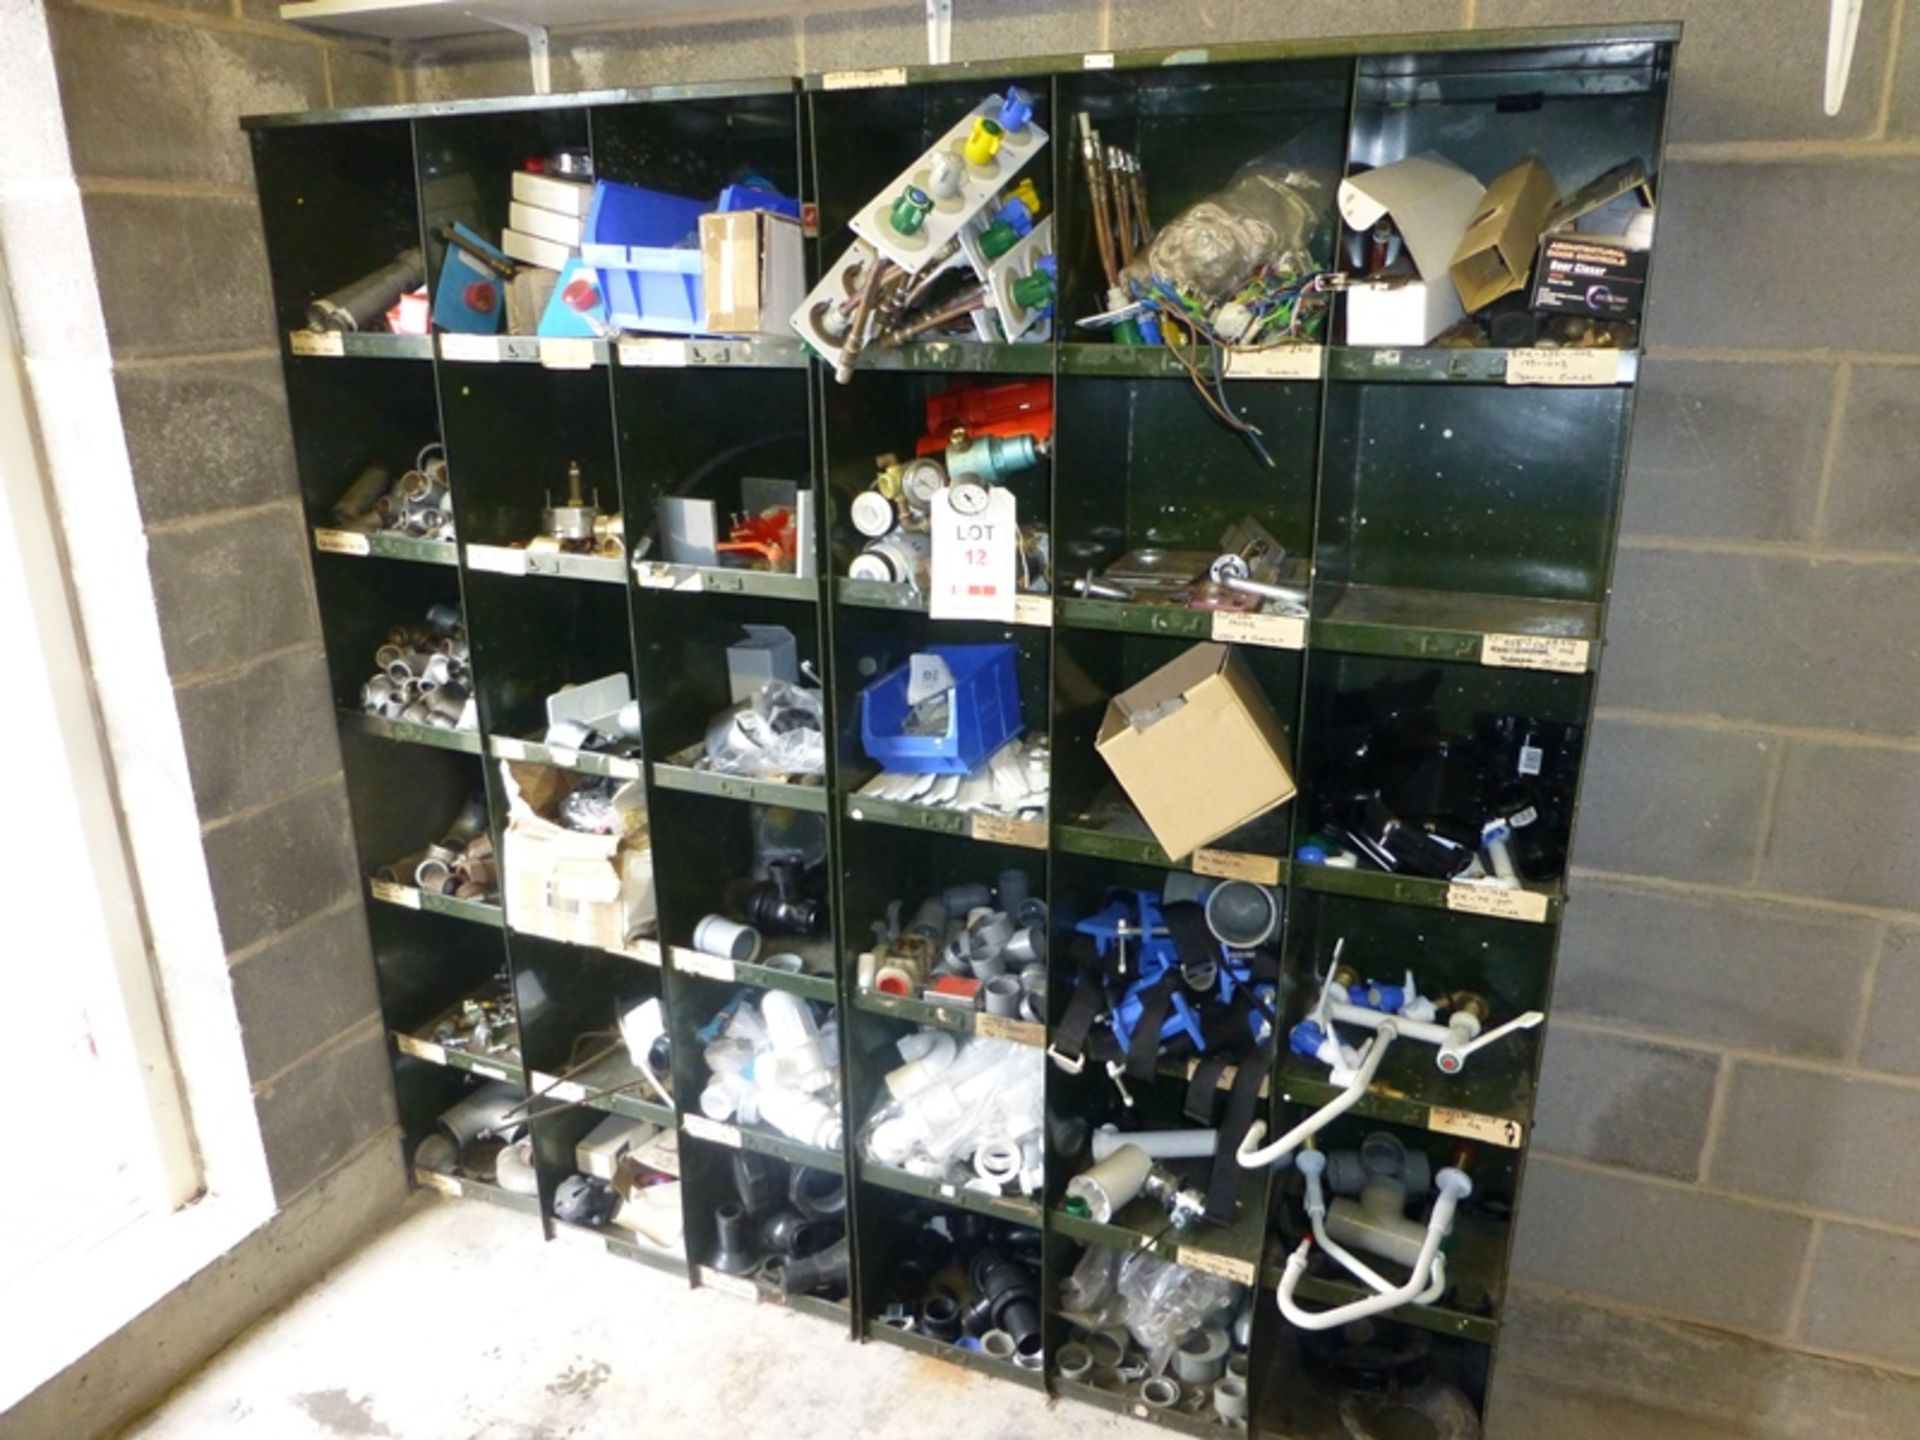 2, 18 compartment pigeon hole racks and contents including pipe fittings, gas fittings, taps and